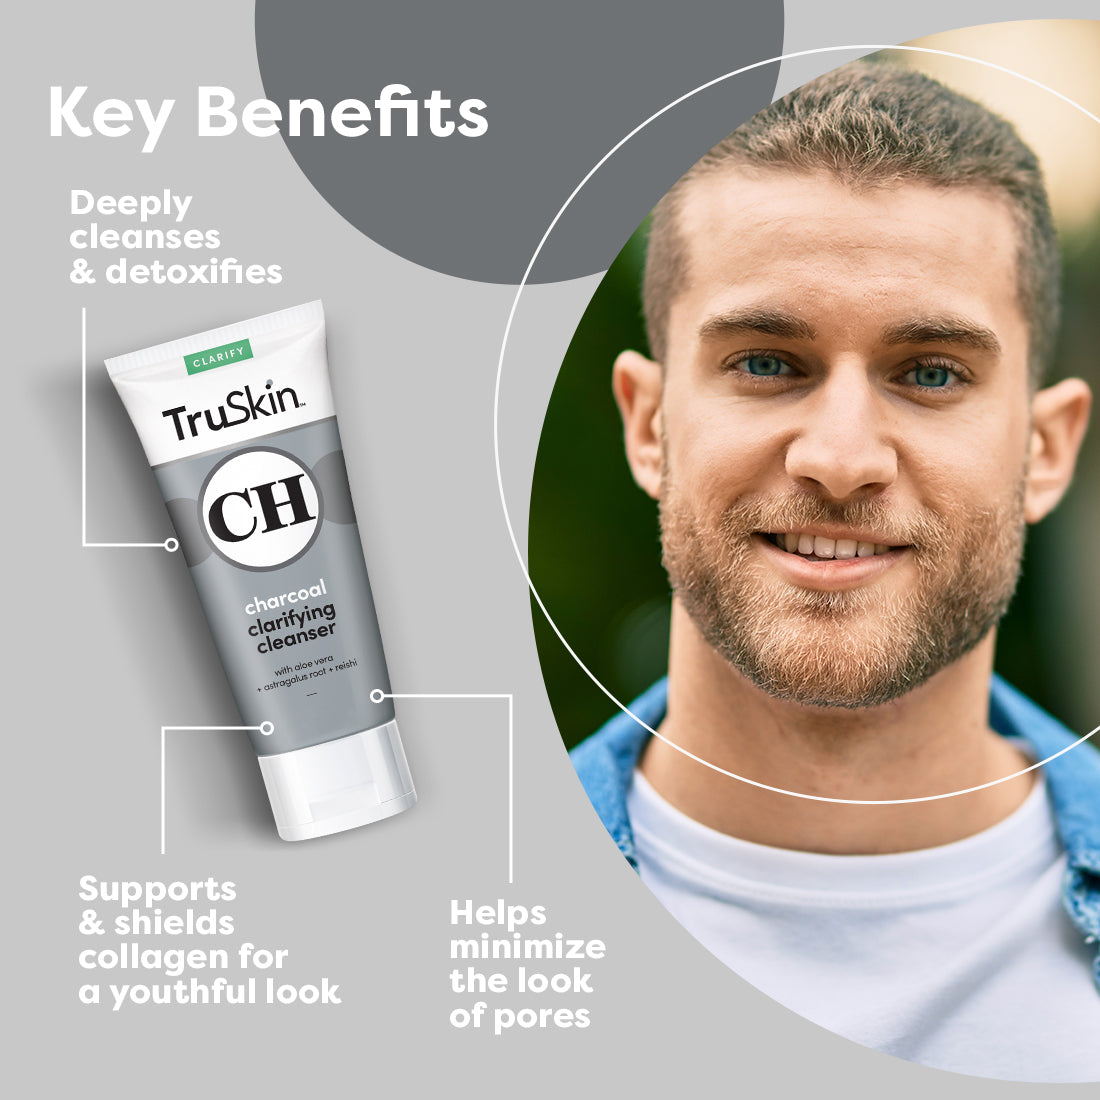 TruSkin Charcoal Clarifying Cleanser